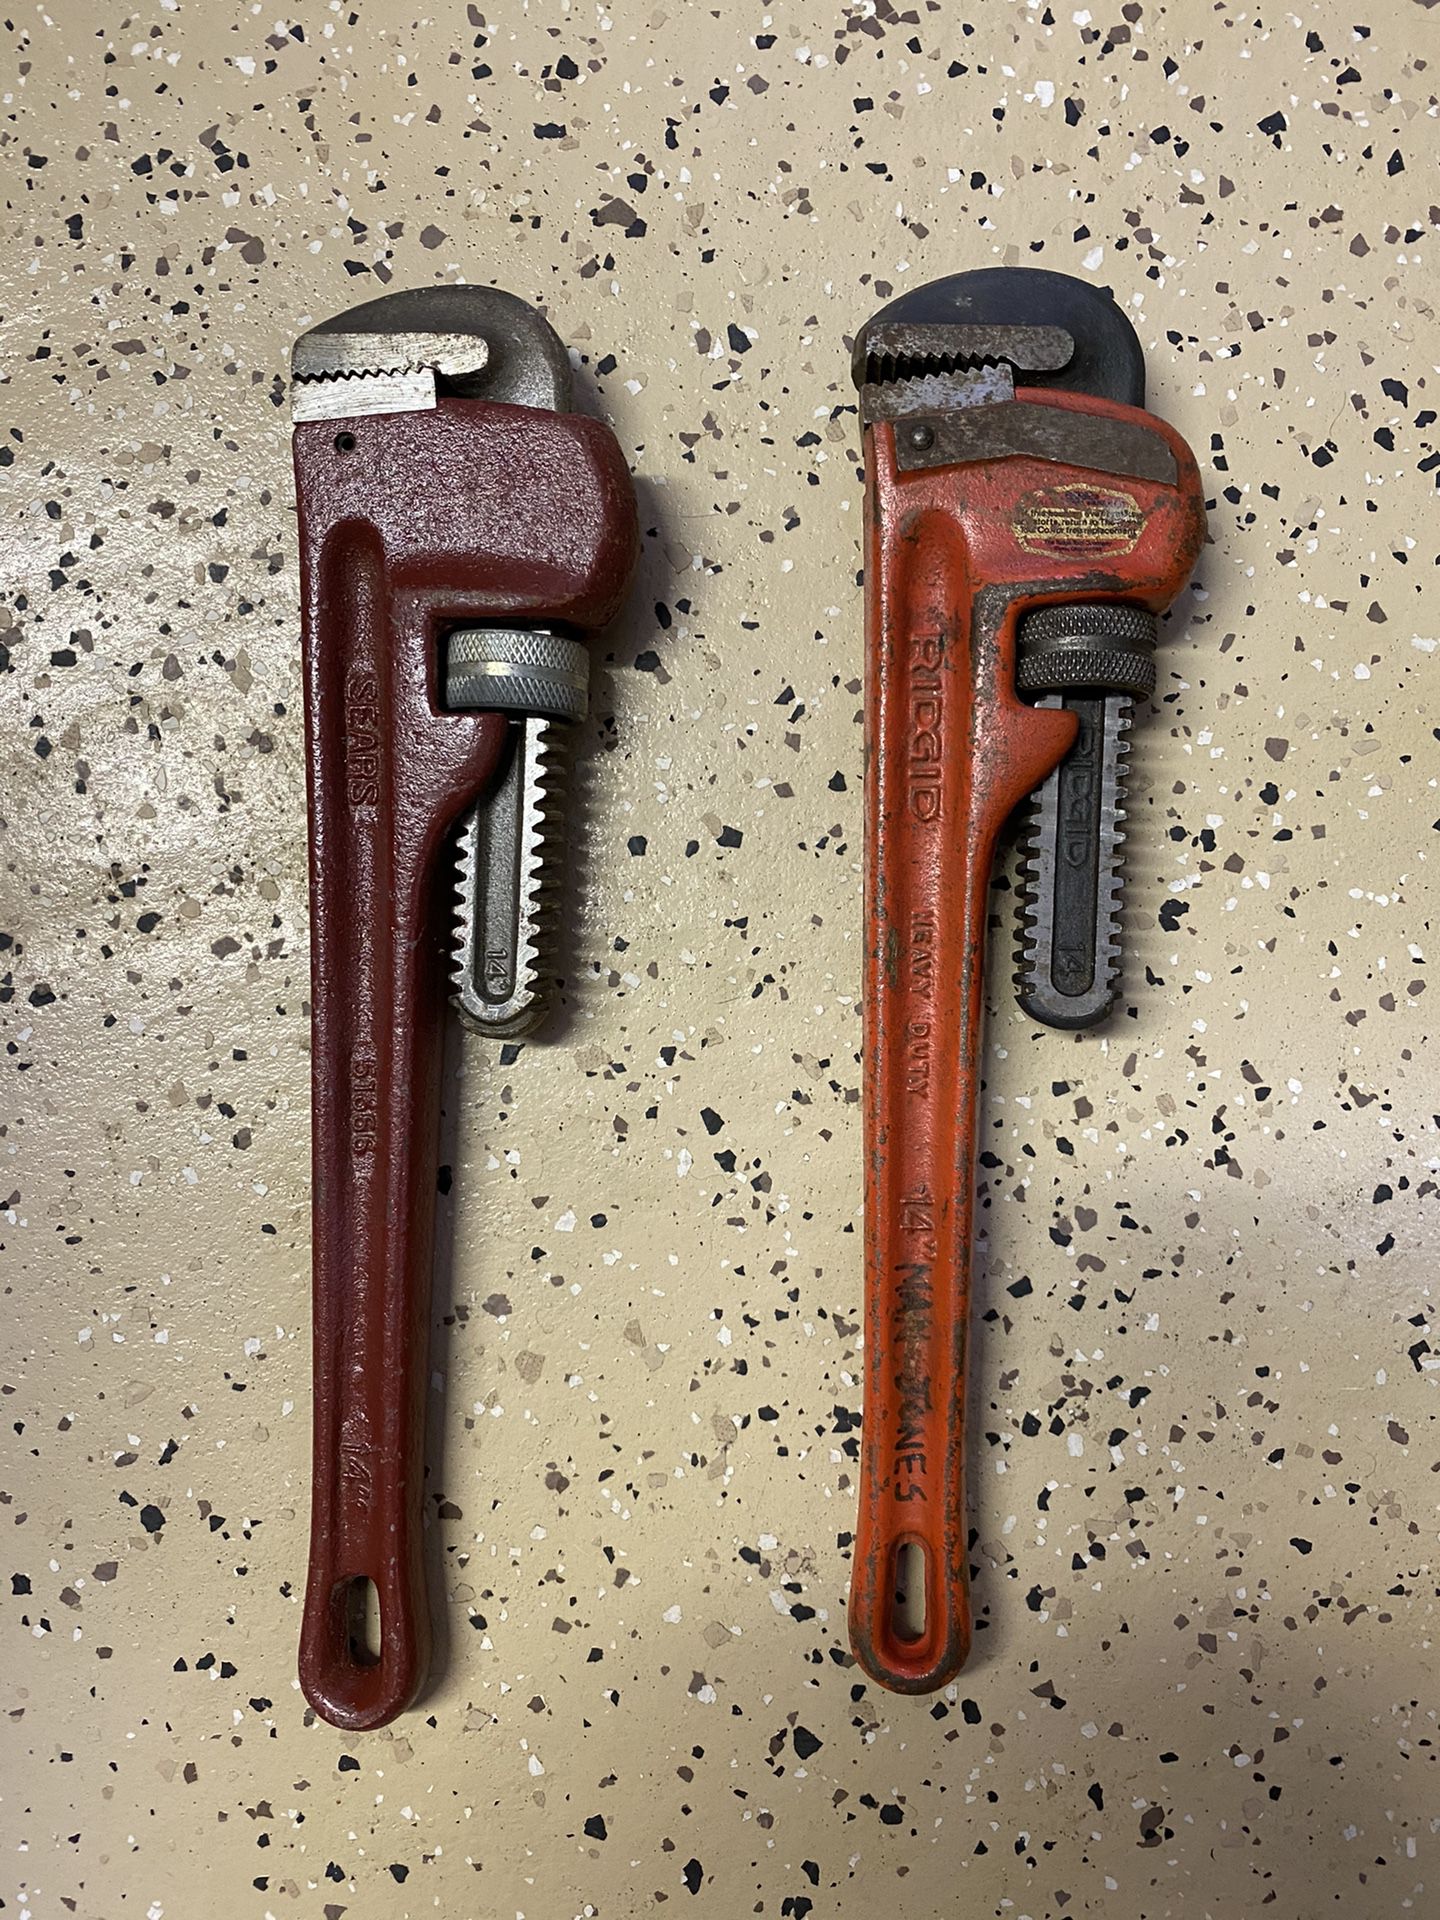 Pipe Wrenches - Ridgid and Sears